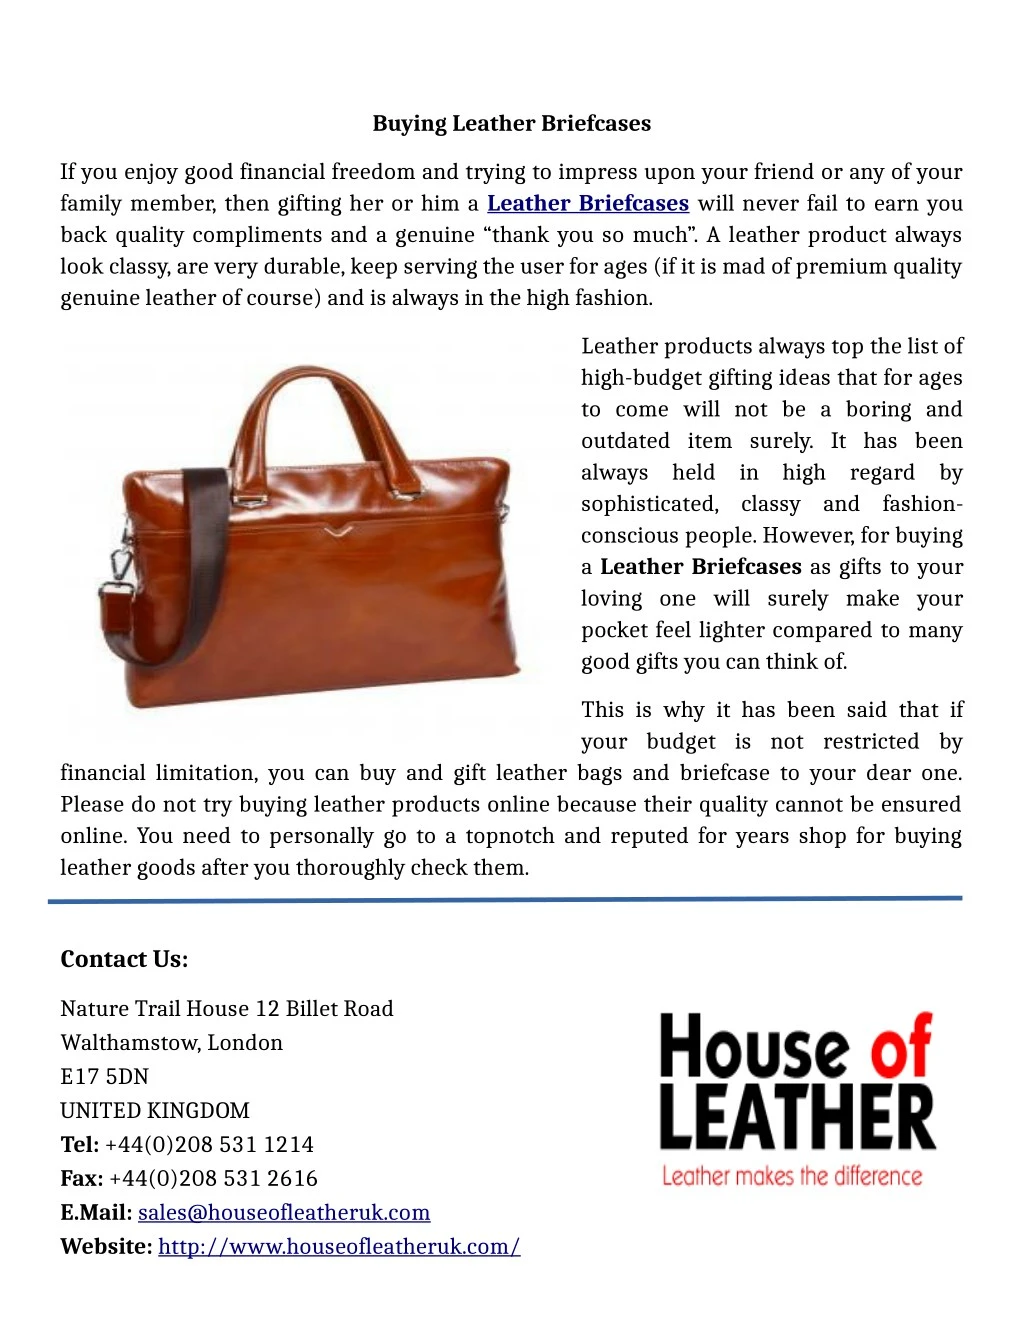 PPT - Buying Leather Briefcases PowerPoint Presentation, free download ...